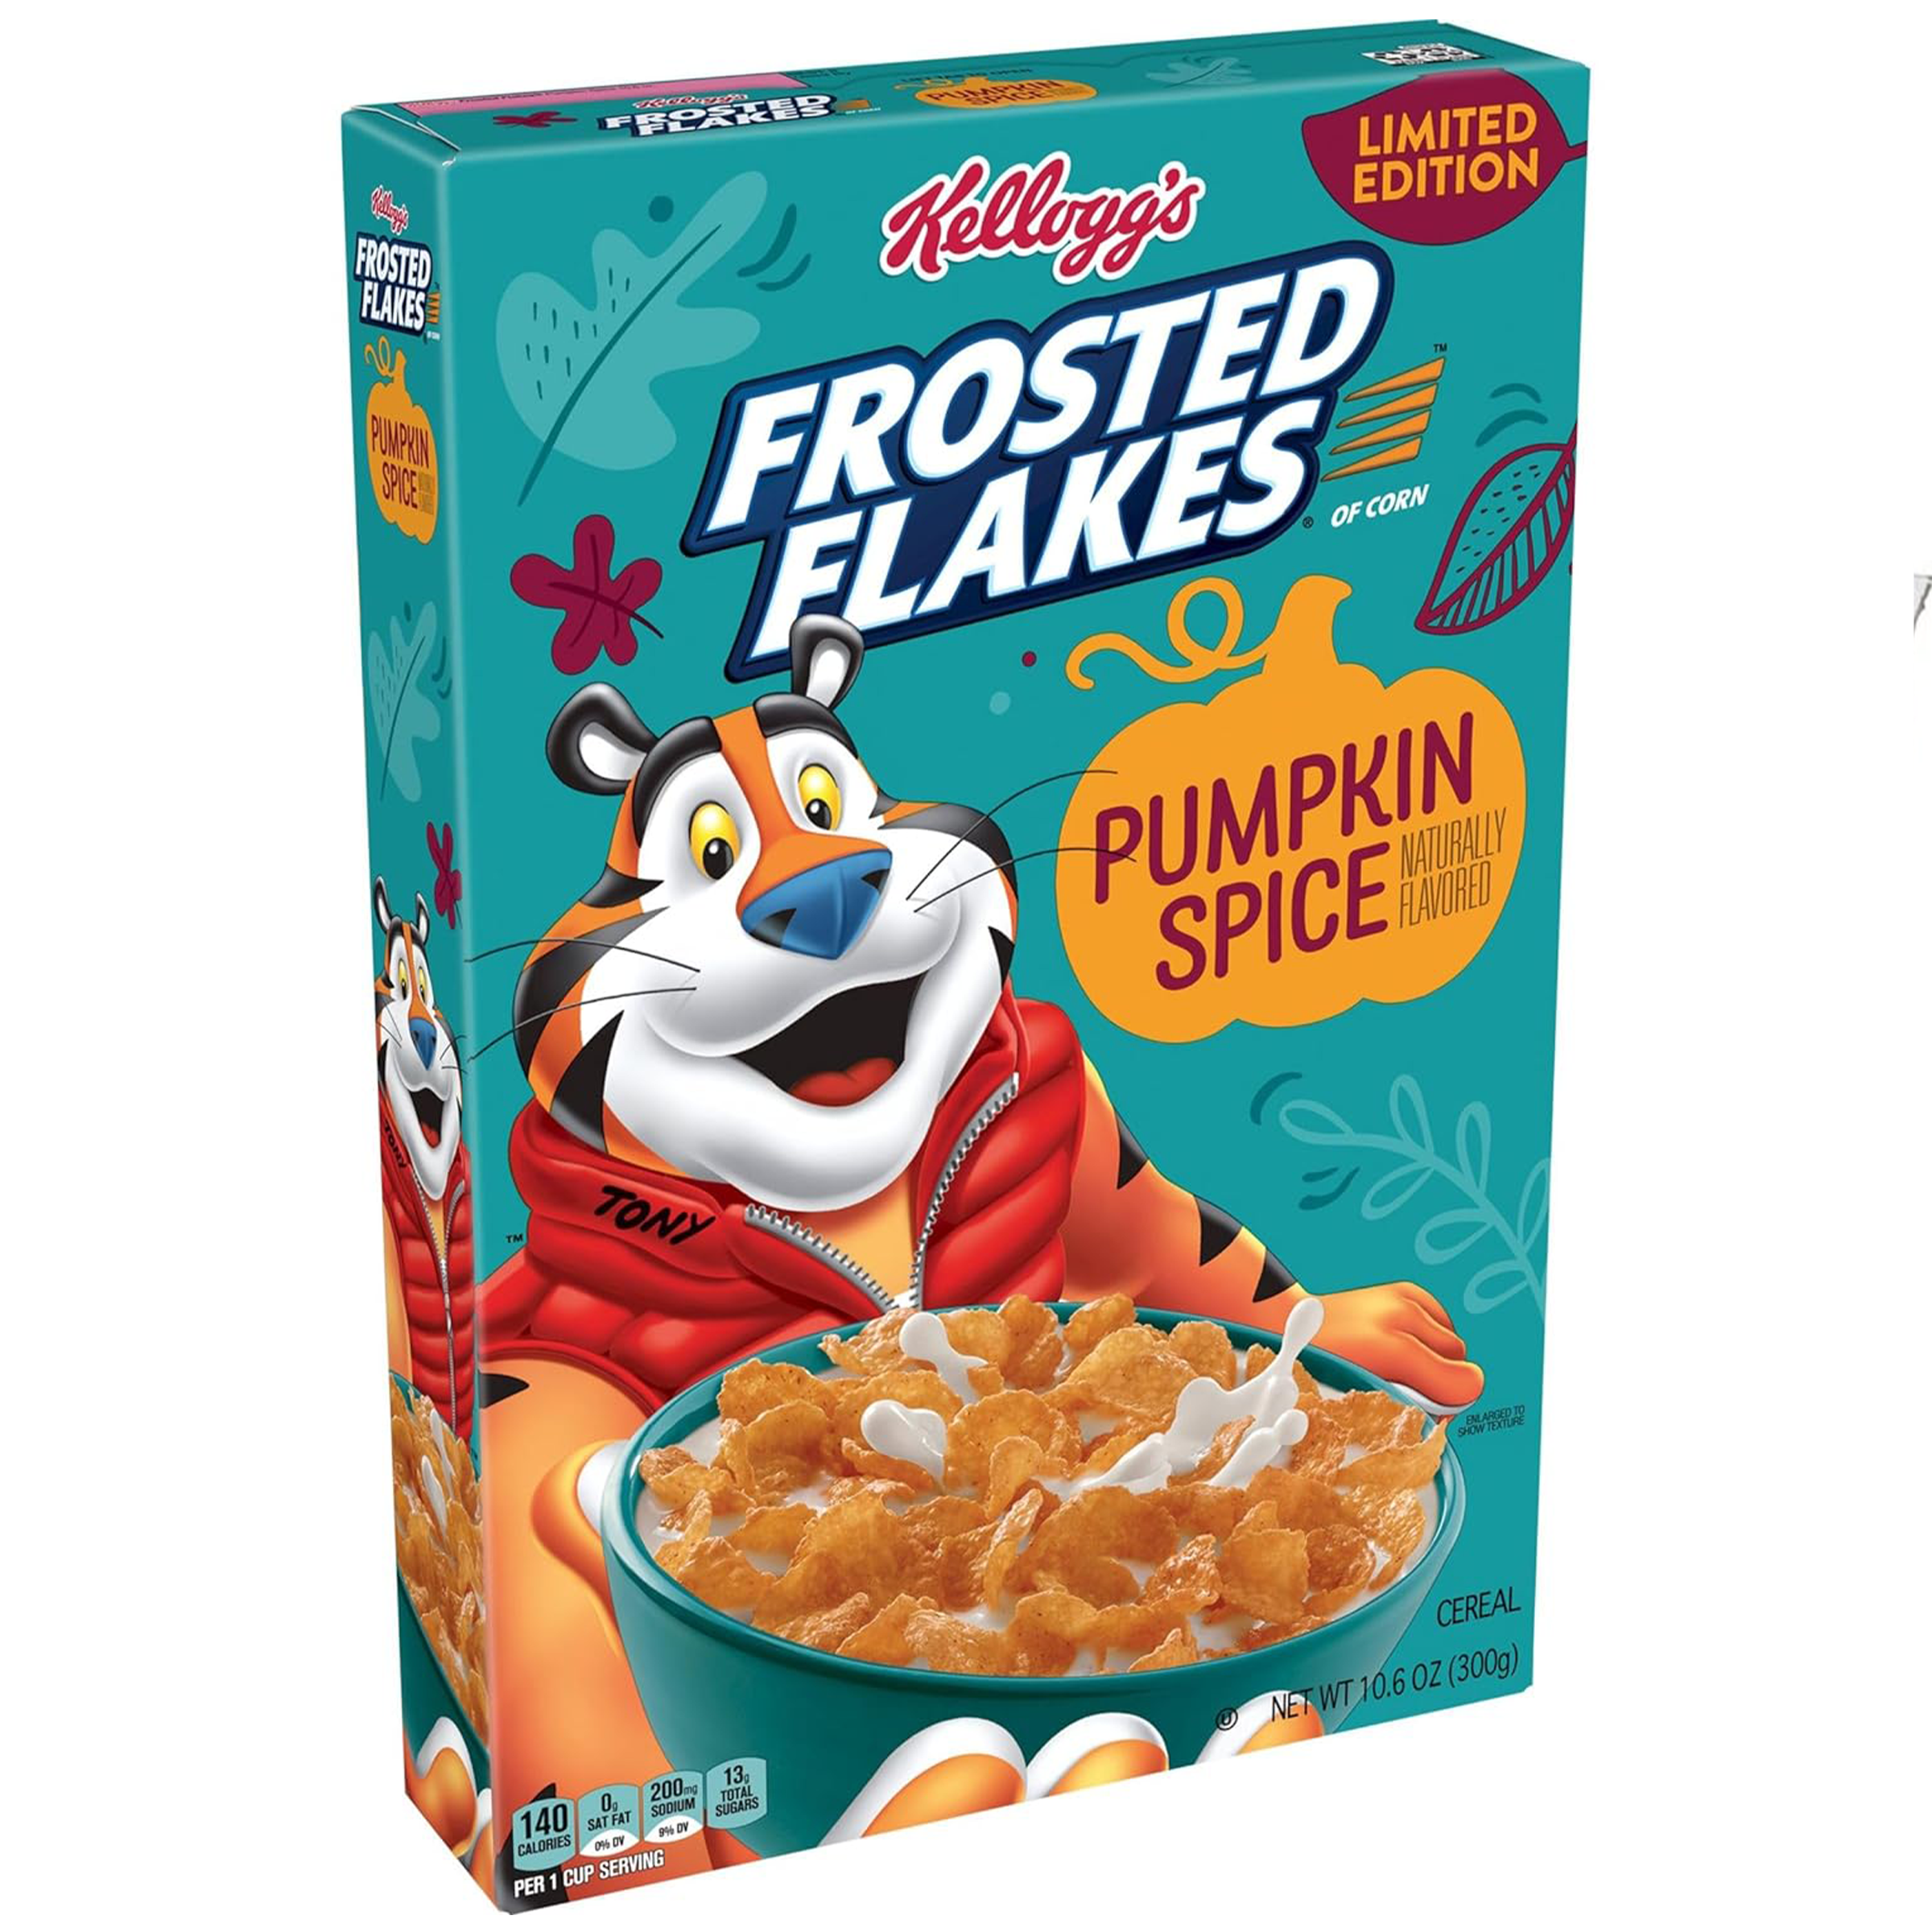 Frosted Flakes - Pumpkin Spice